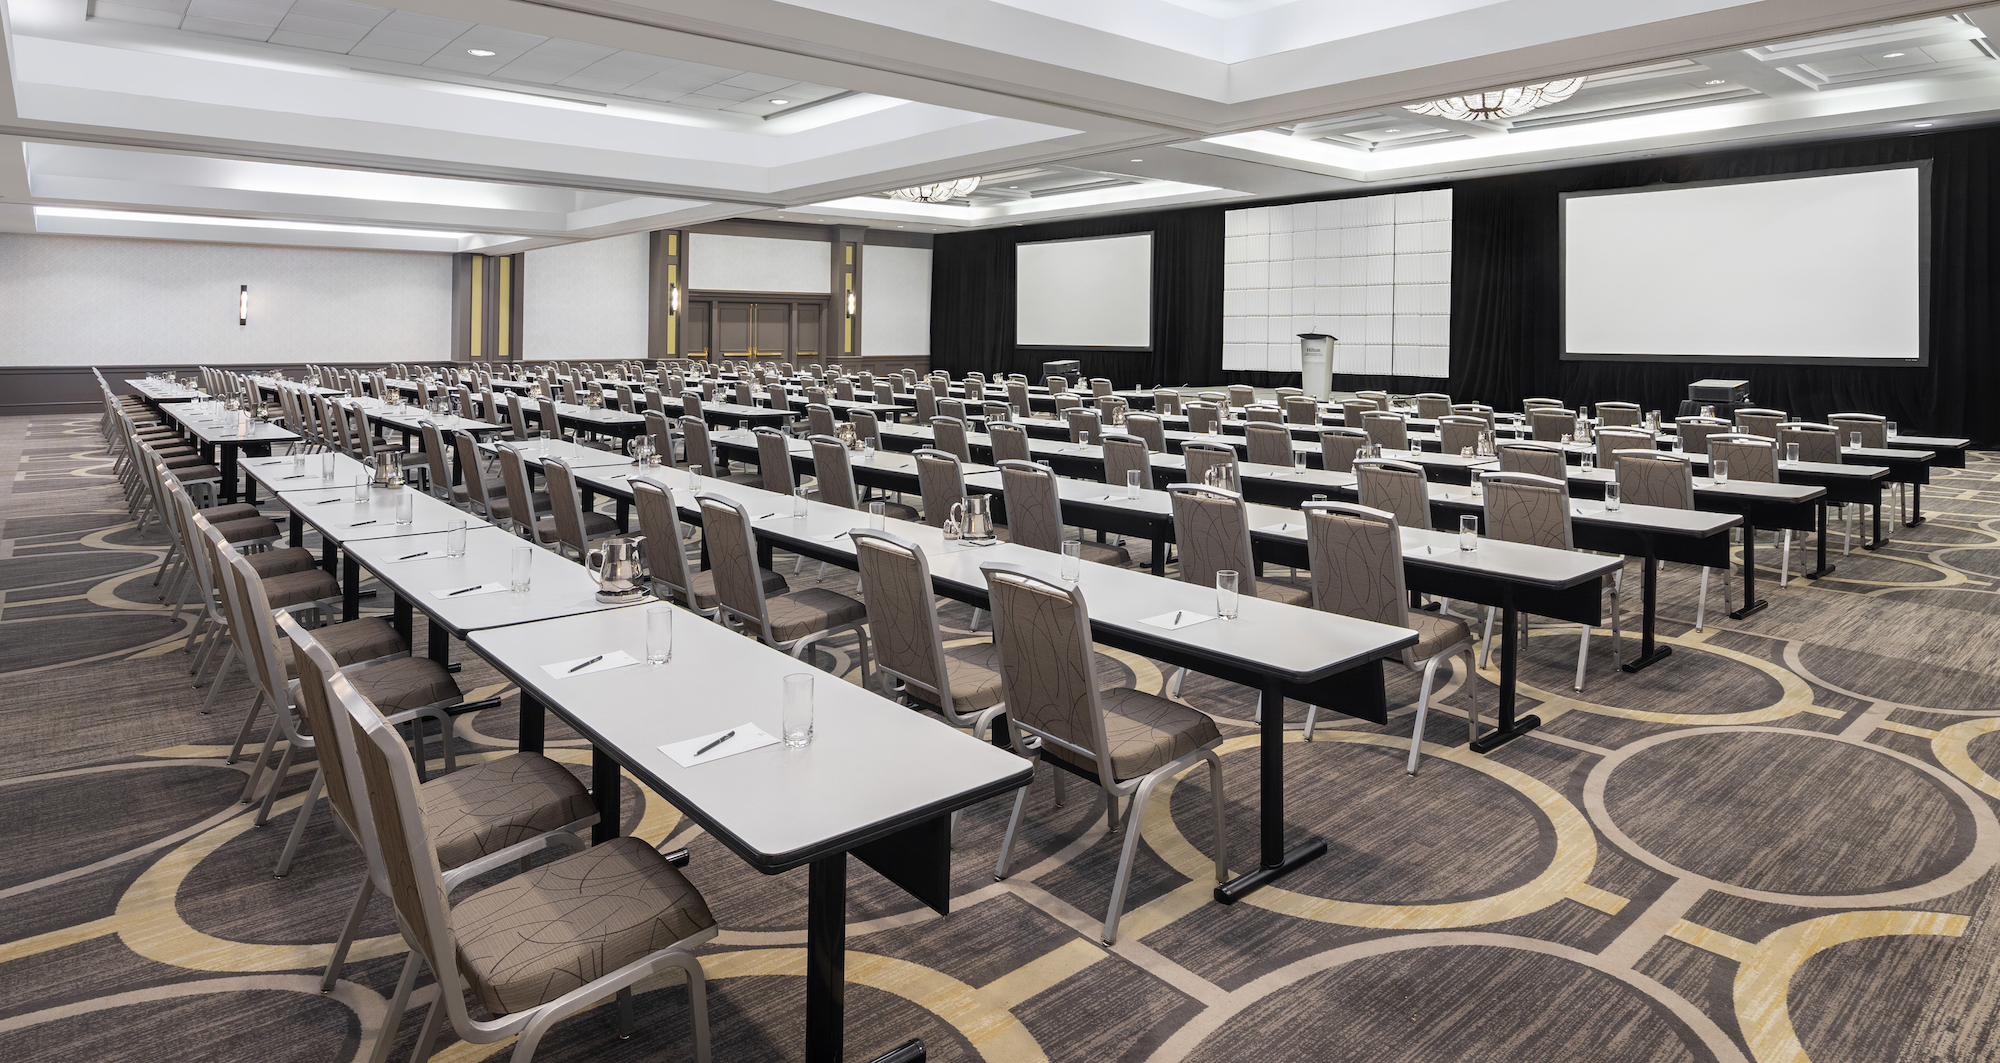 The Hilton Chicago/Oak Brook Hills Resort's 13,000+ square foot Grand Ballroom can be transformed into a spacious classroom setting.